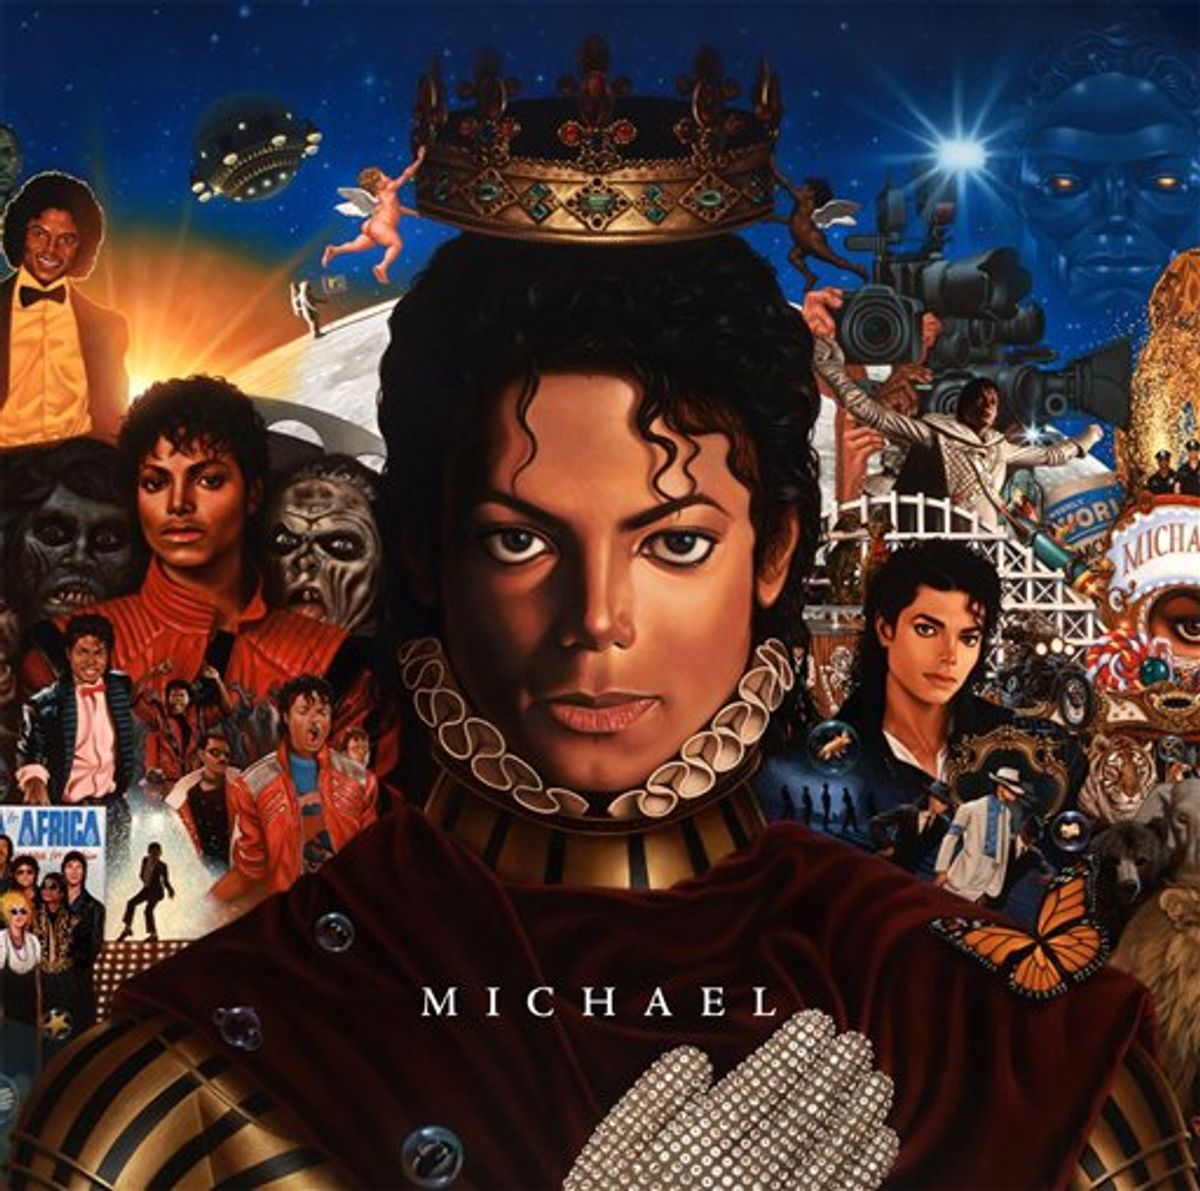 In this CD cover image released by Epic Records, newly completed recordings from Michael Jackson entitled "Michael," is shown. The CD will be released on Dec.14. (AP Photo/Epic Records)  (AP)